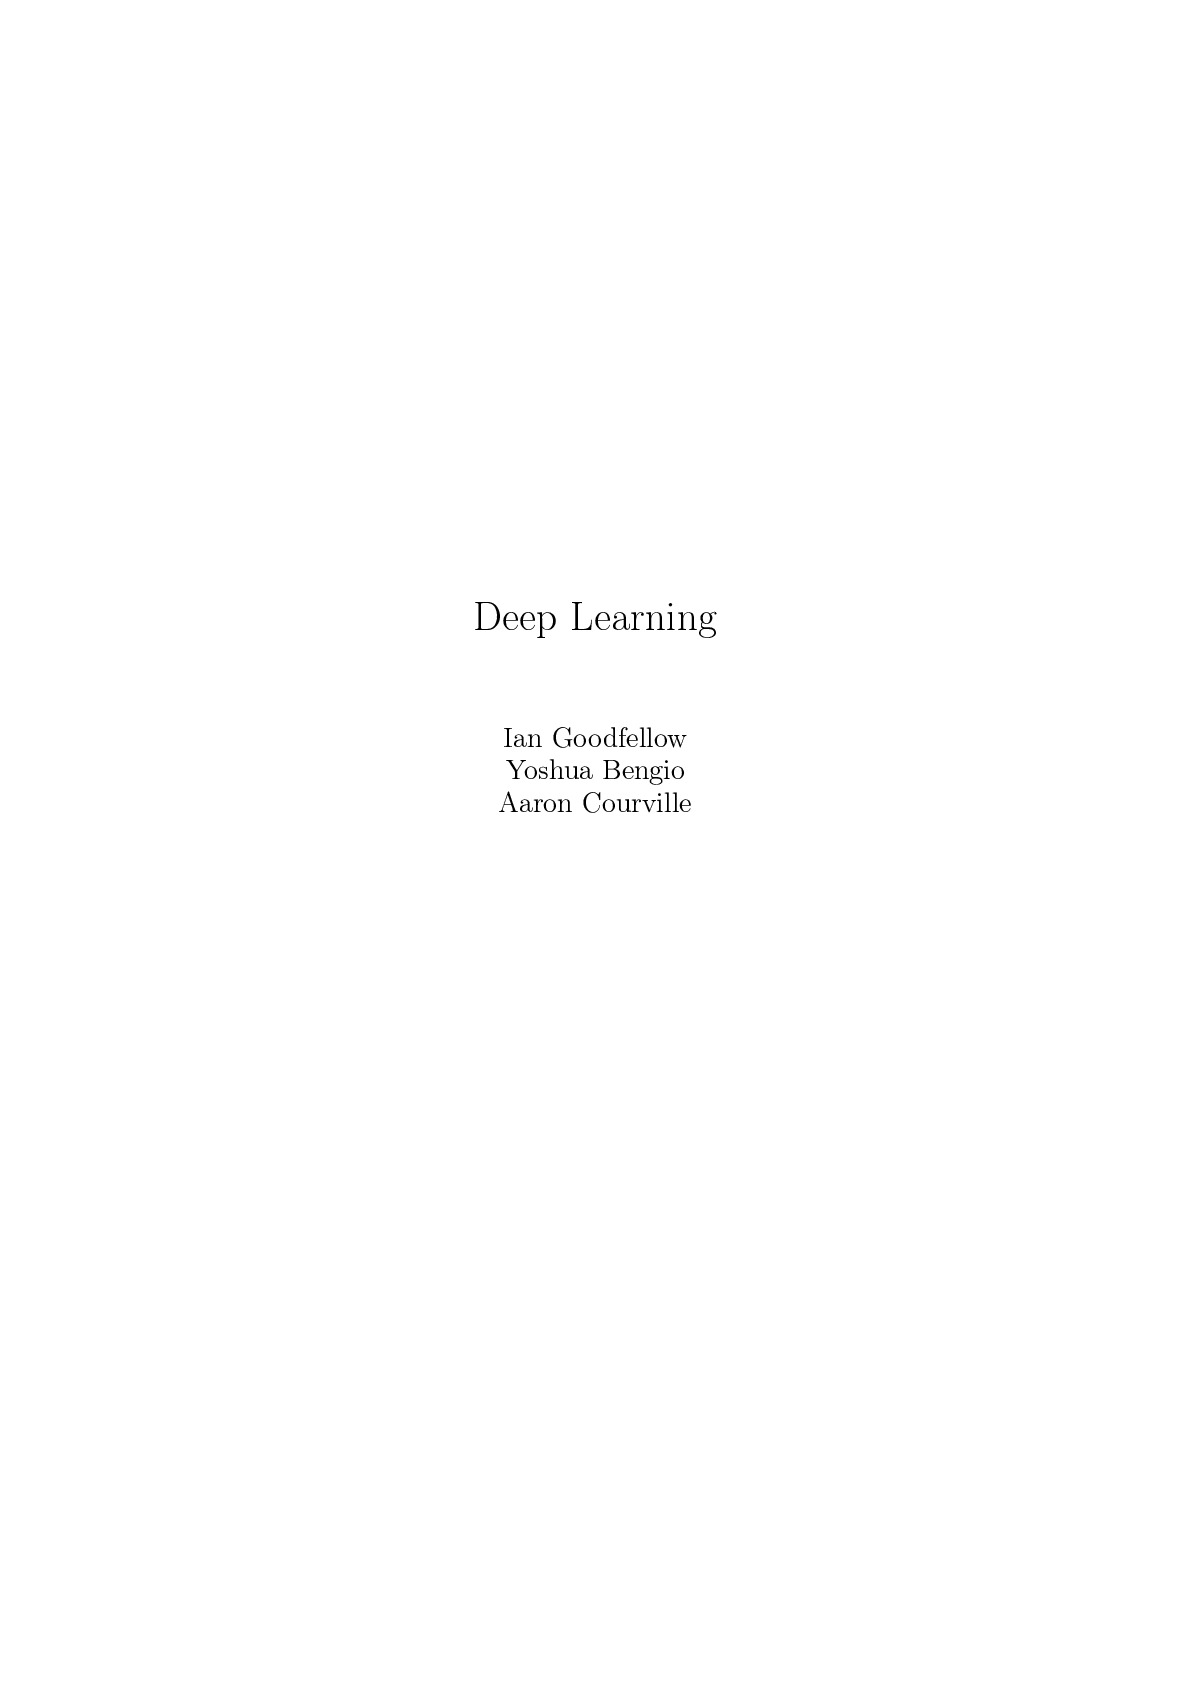 MIT-Deep-Learning